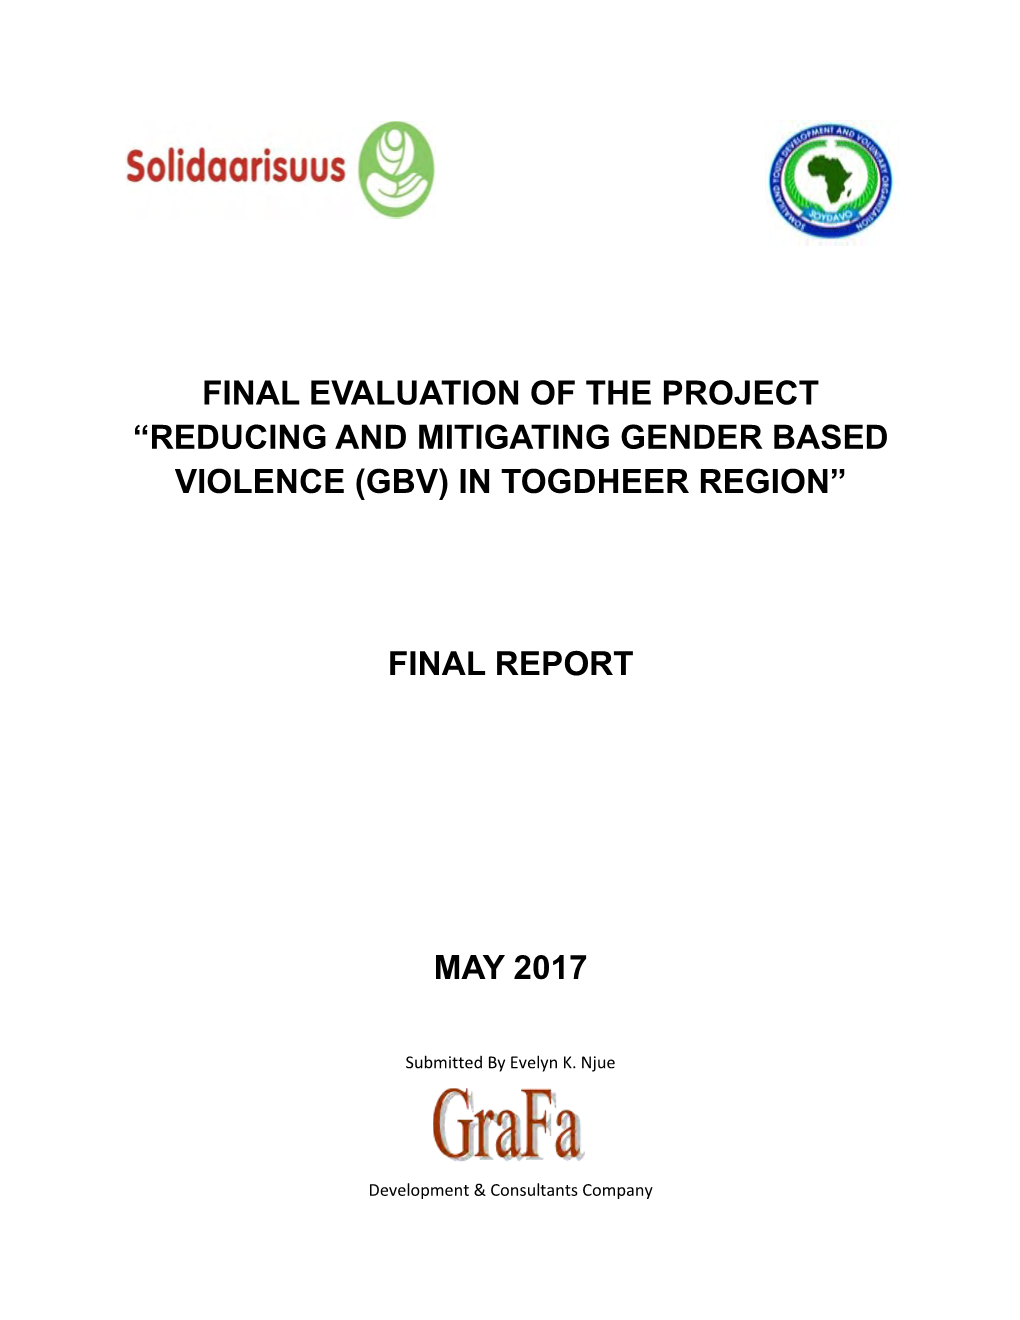 Final Evaluation of the Project “Reducing and Mitigating Gender Based Violence (Gbv) in Togdheer Region”